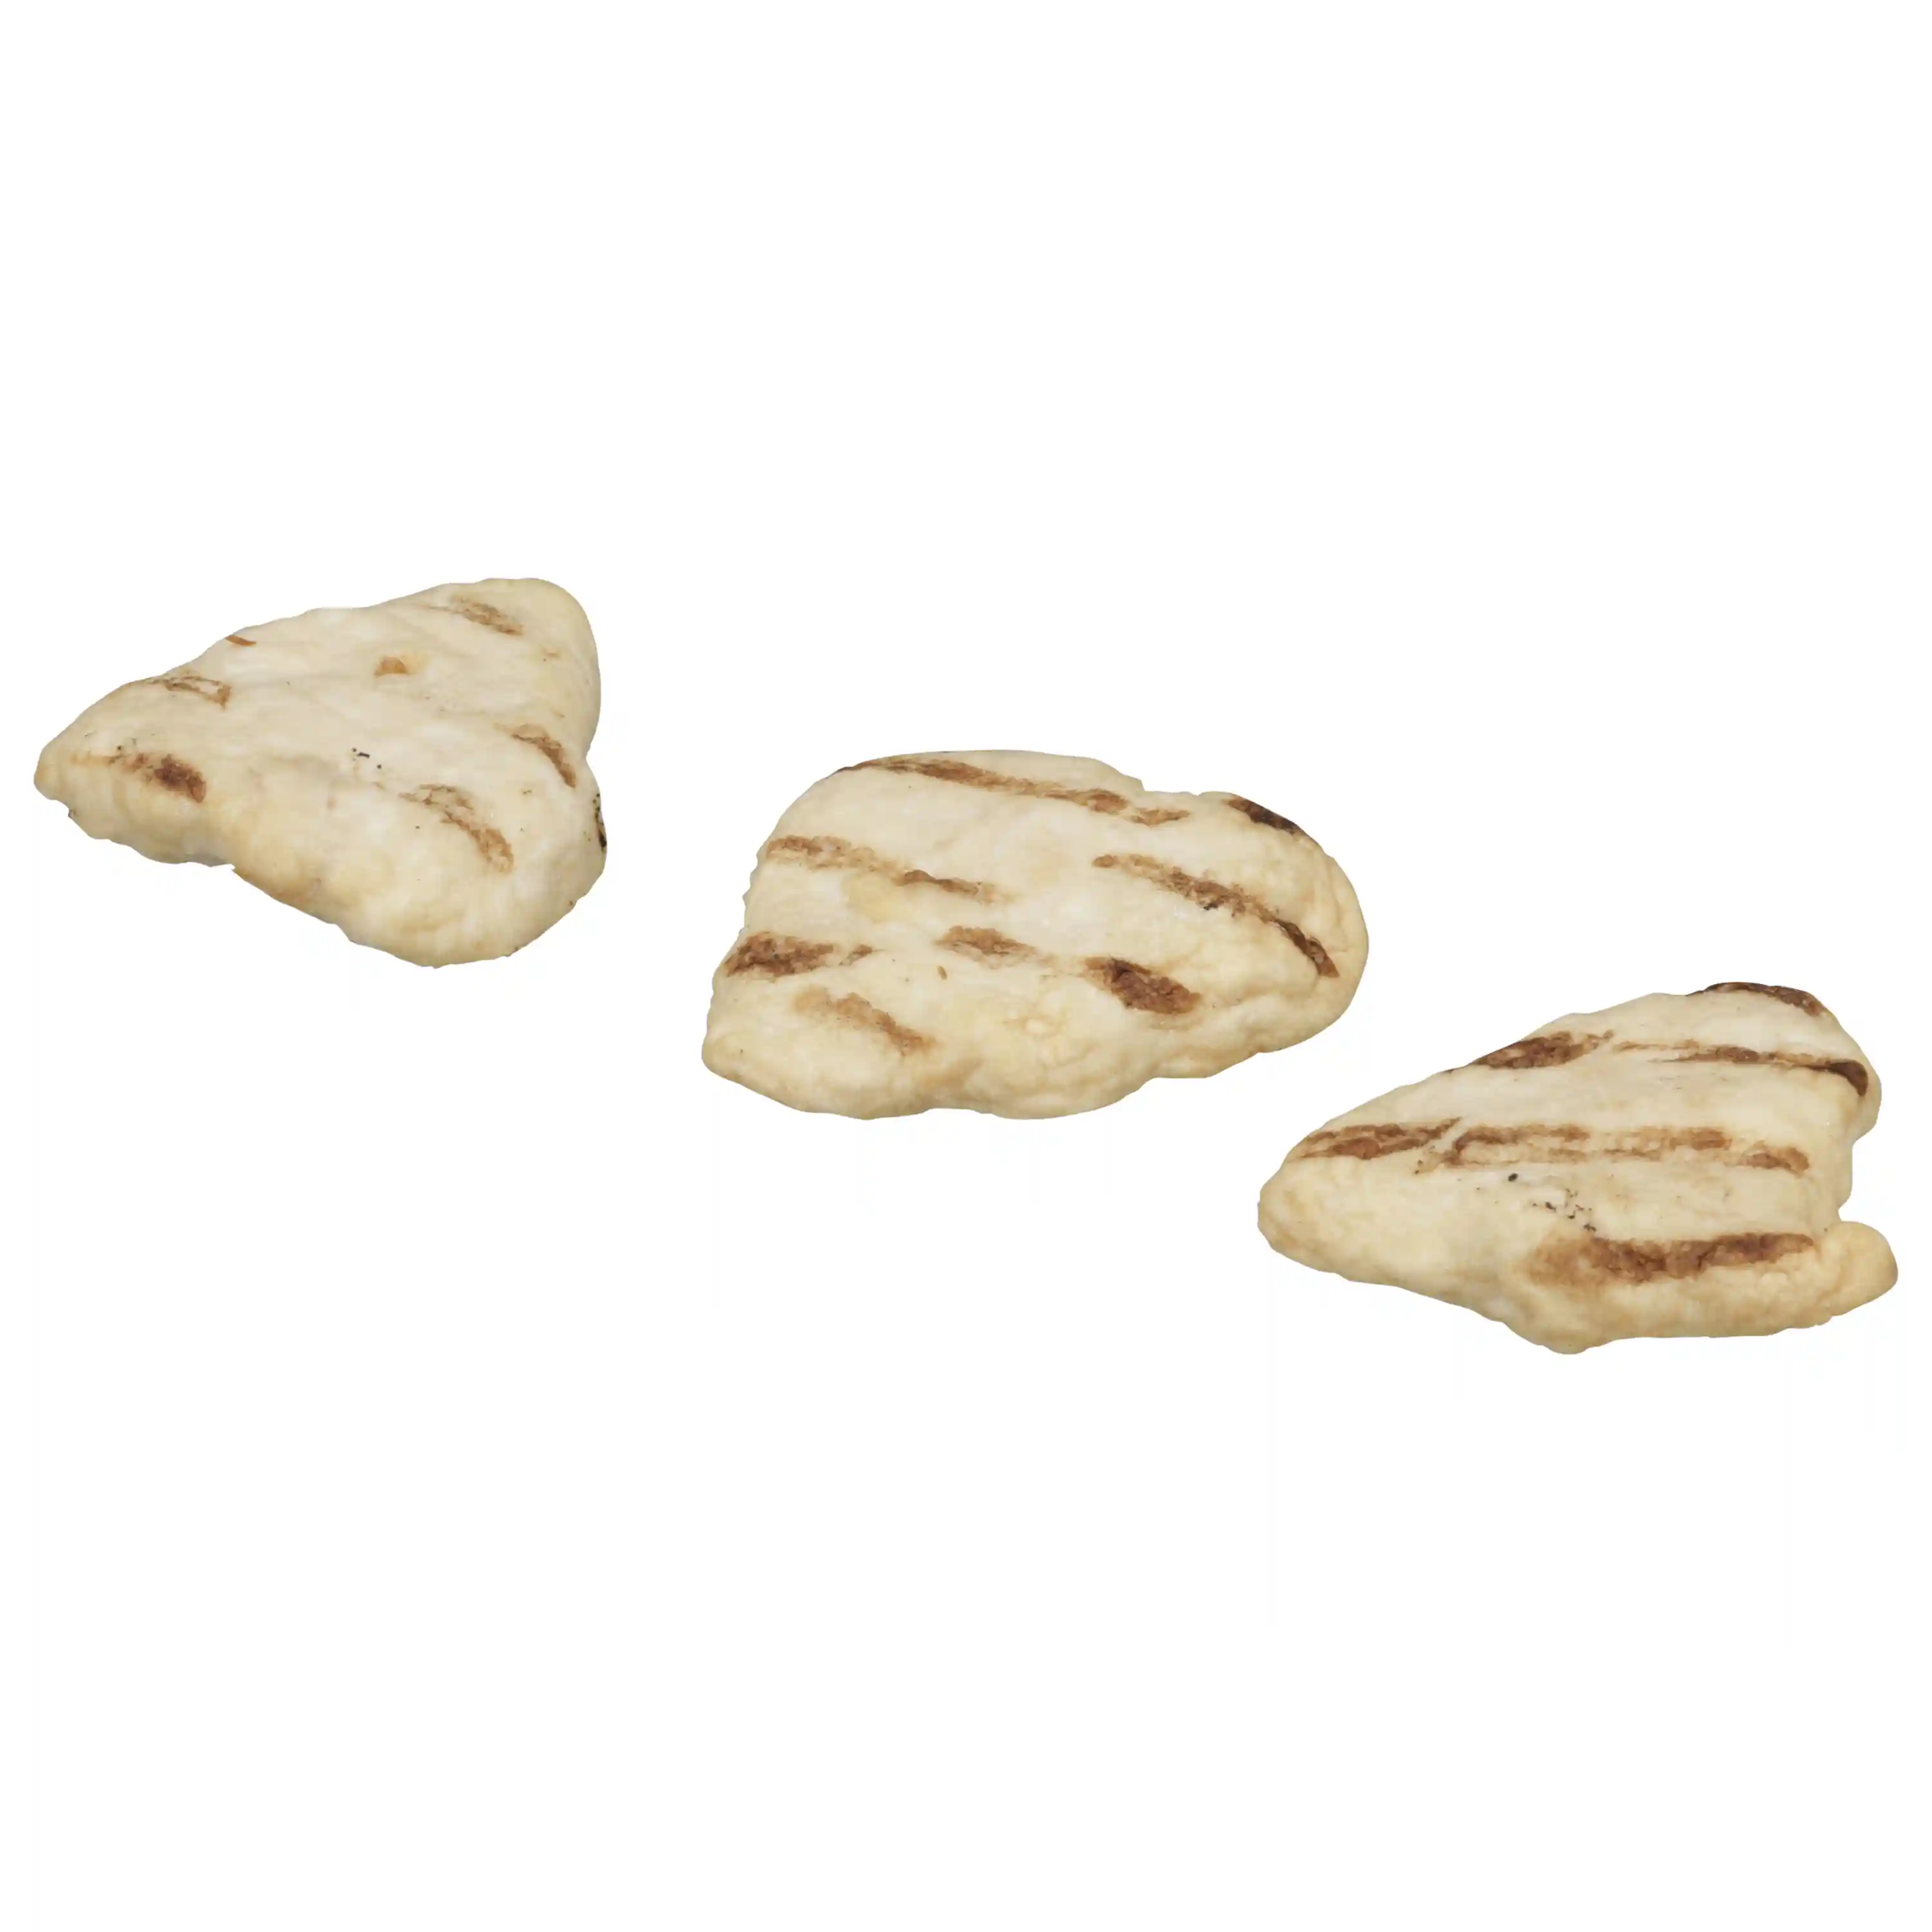 Tyson® Fully Cooked Grilled MWWM Chicken Breast Filets, 2.26 oz. _image_01